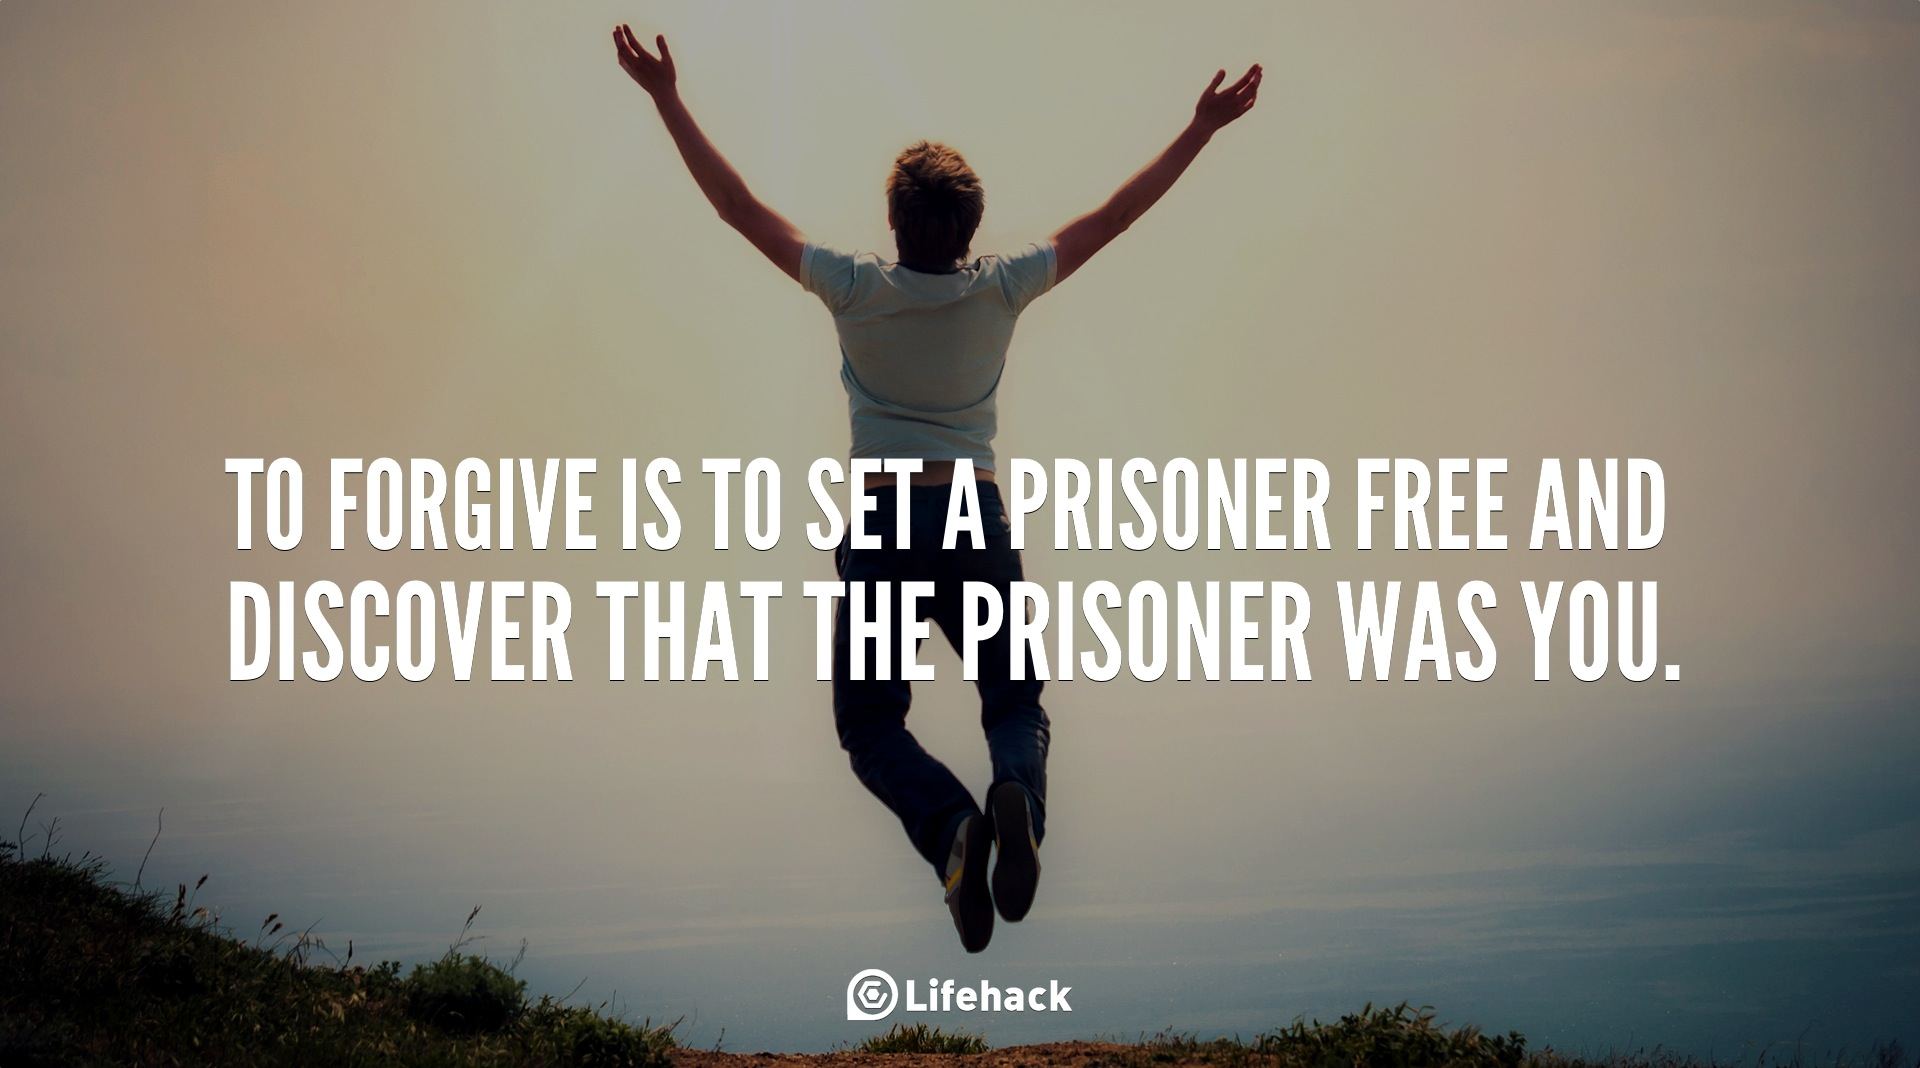 30sec Tip: To Forgive is to Set a Prisoner Free